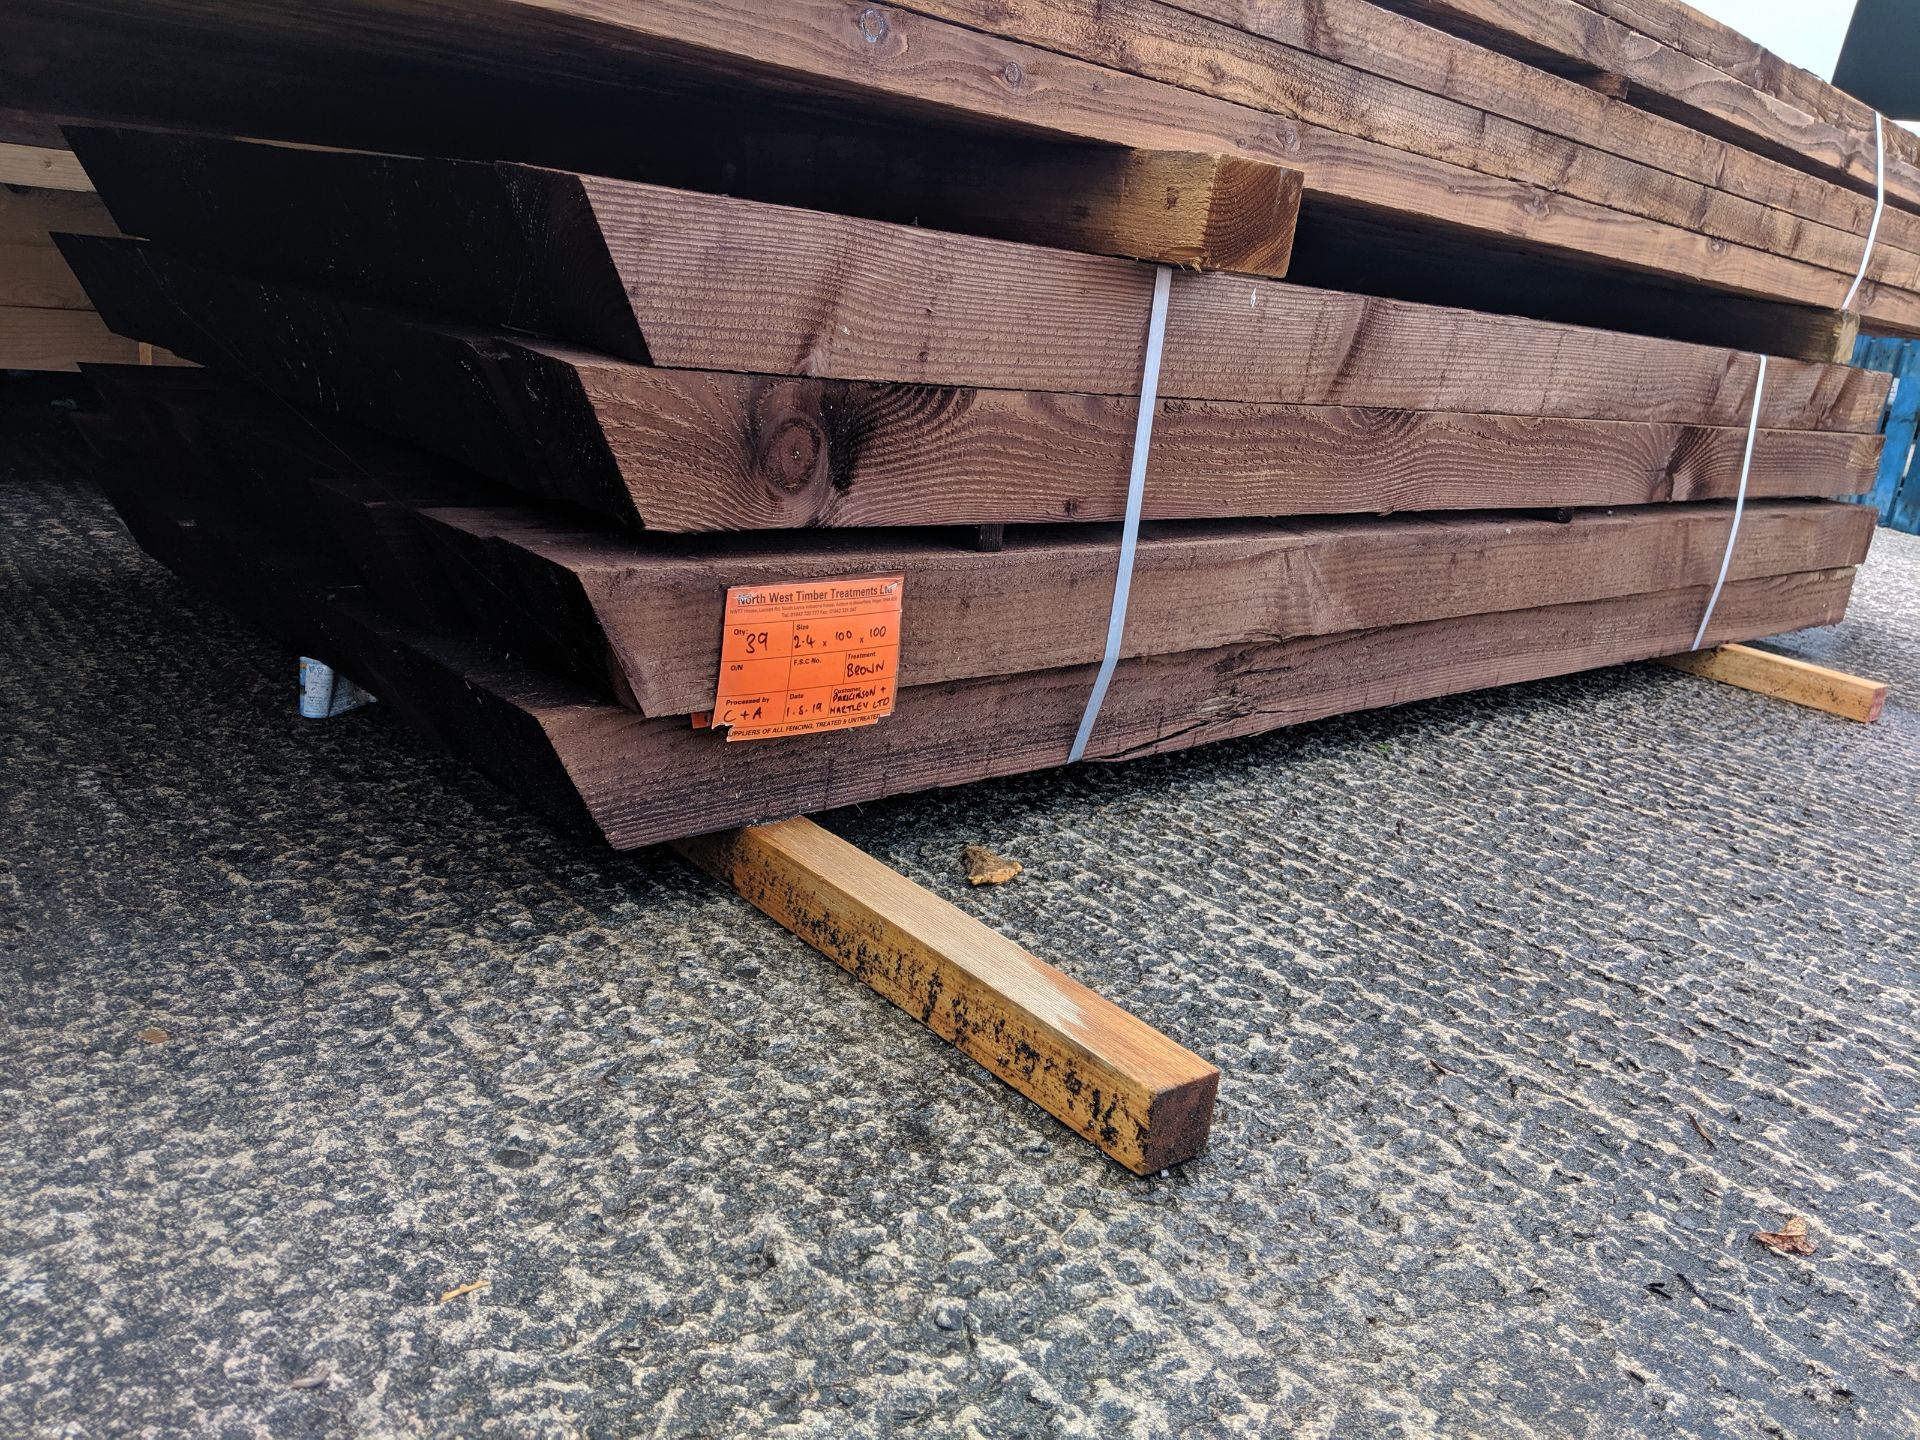 Bundle containing approximately 39 brown treated fence posts, indicated on a label as being size 2.4 - Image 2 of 5